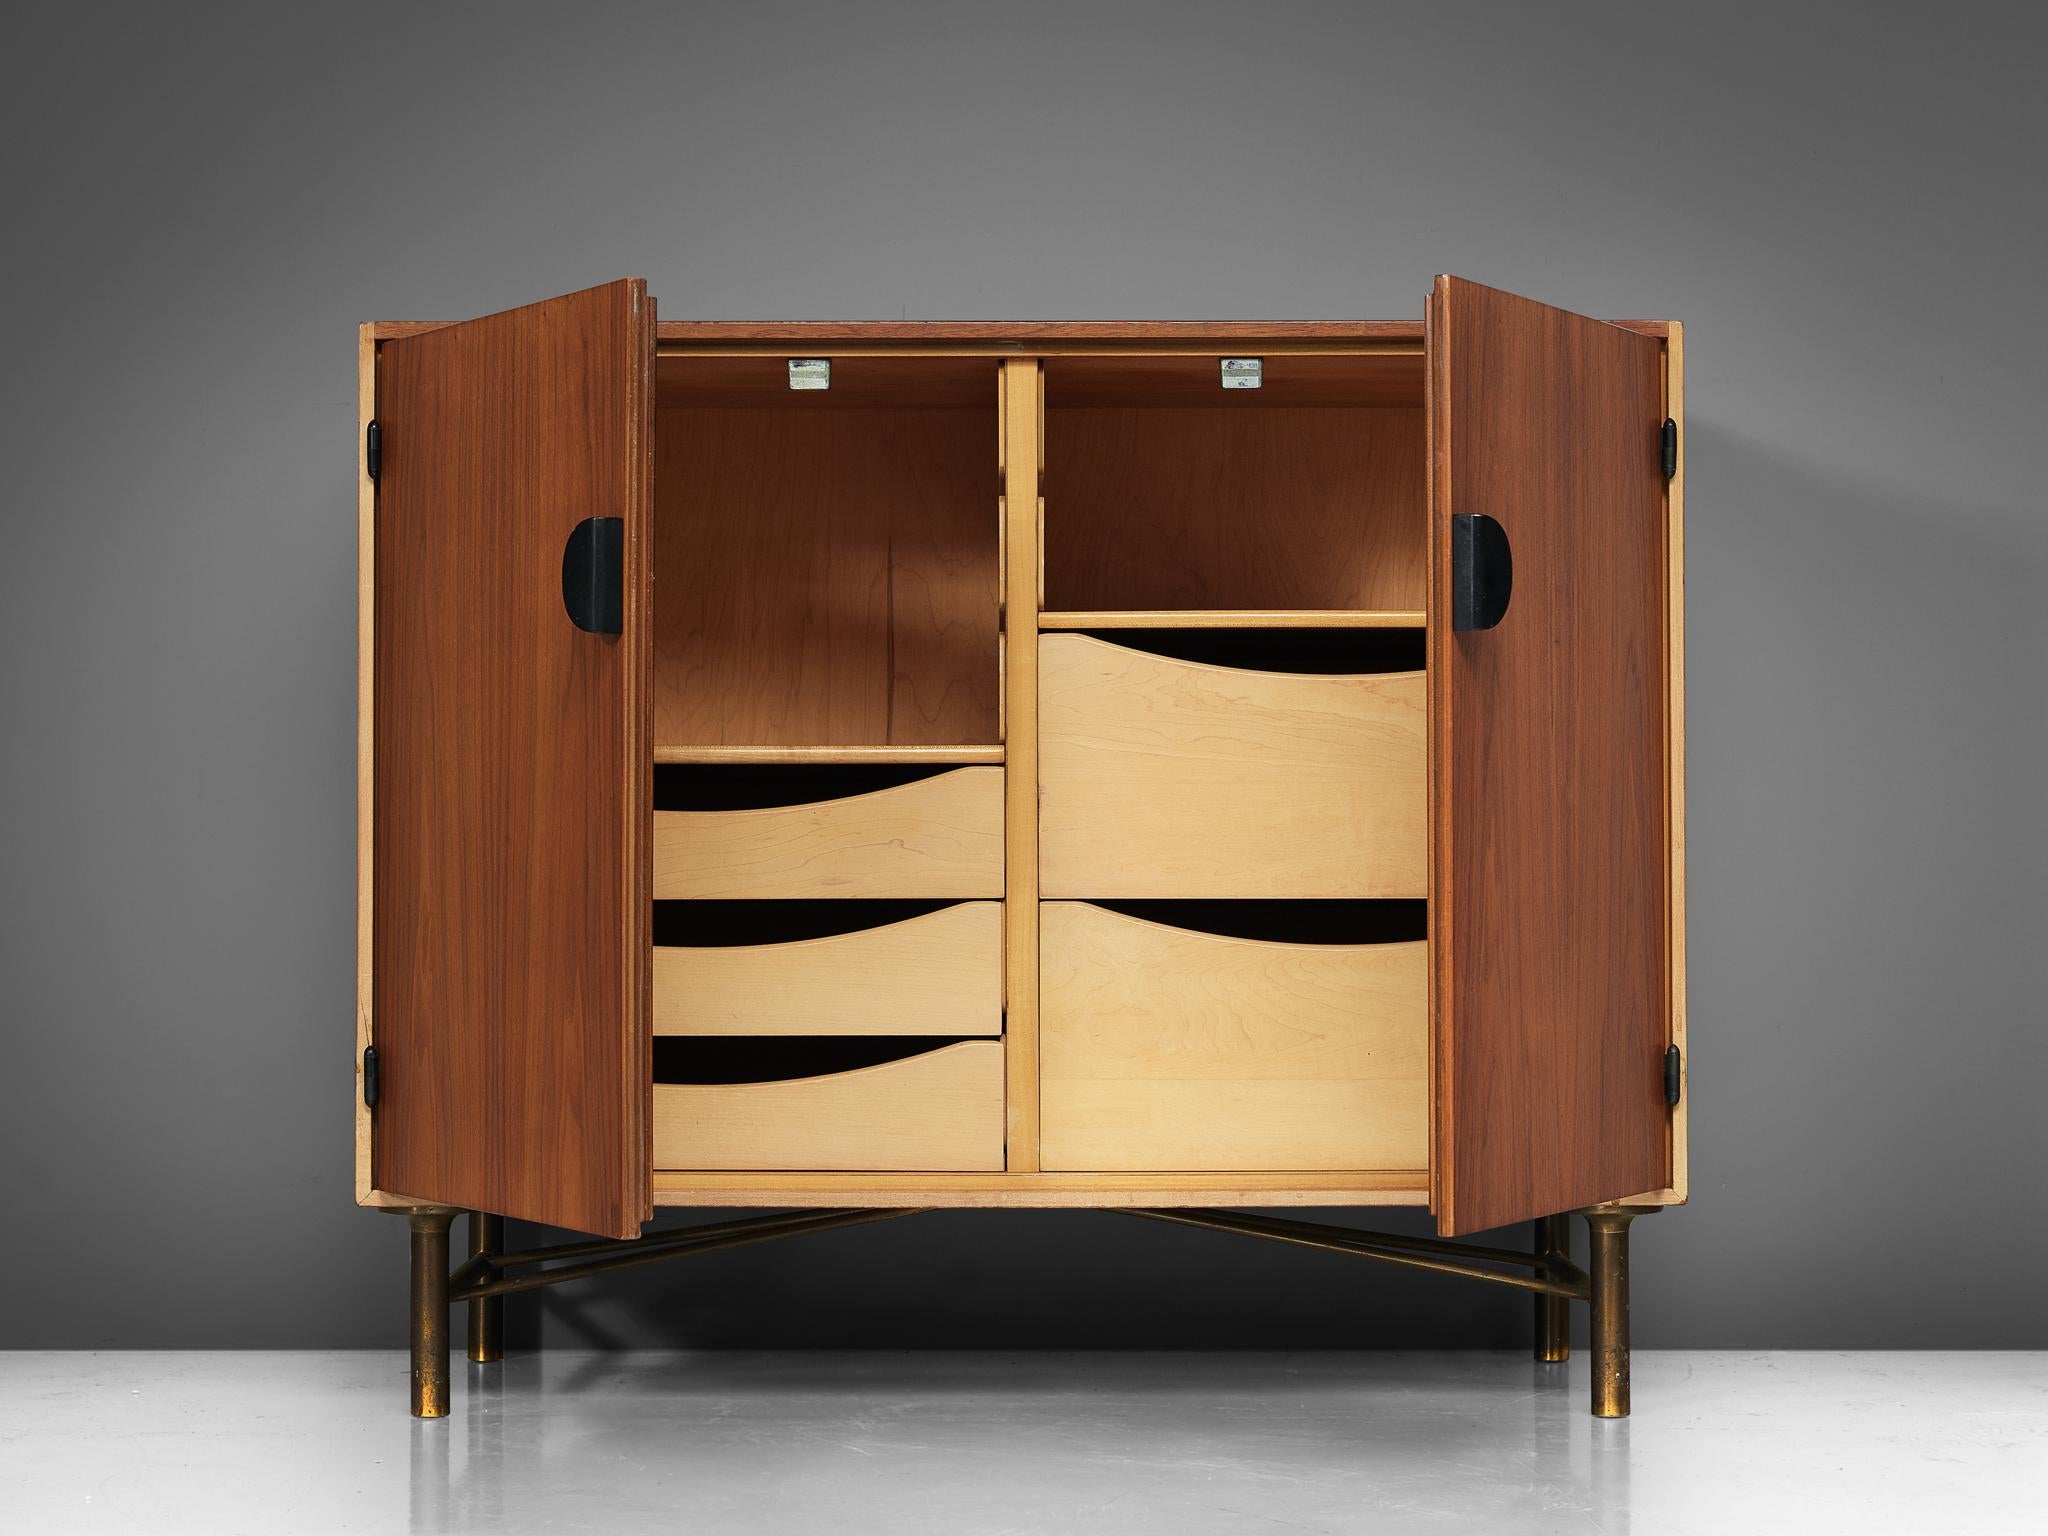 Finn Juhl for Baker Furniture, cabinet, maple, walnut and metal, Unites States, 1950s

A small cabinet by Finn Juhl for the American company Baker Furniture. The cabinet was part of the first Danish Modern furniture collection for the American